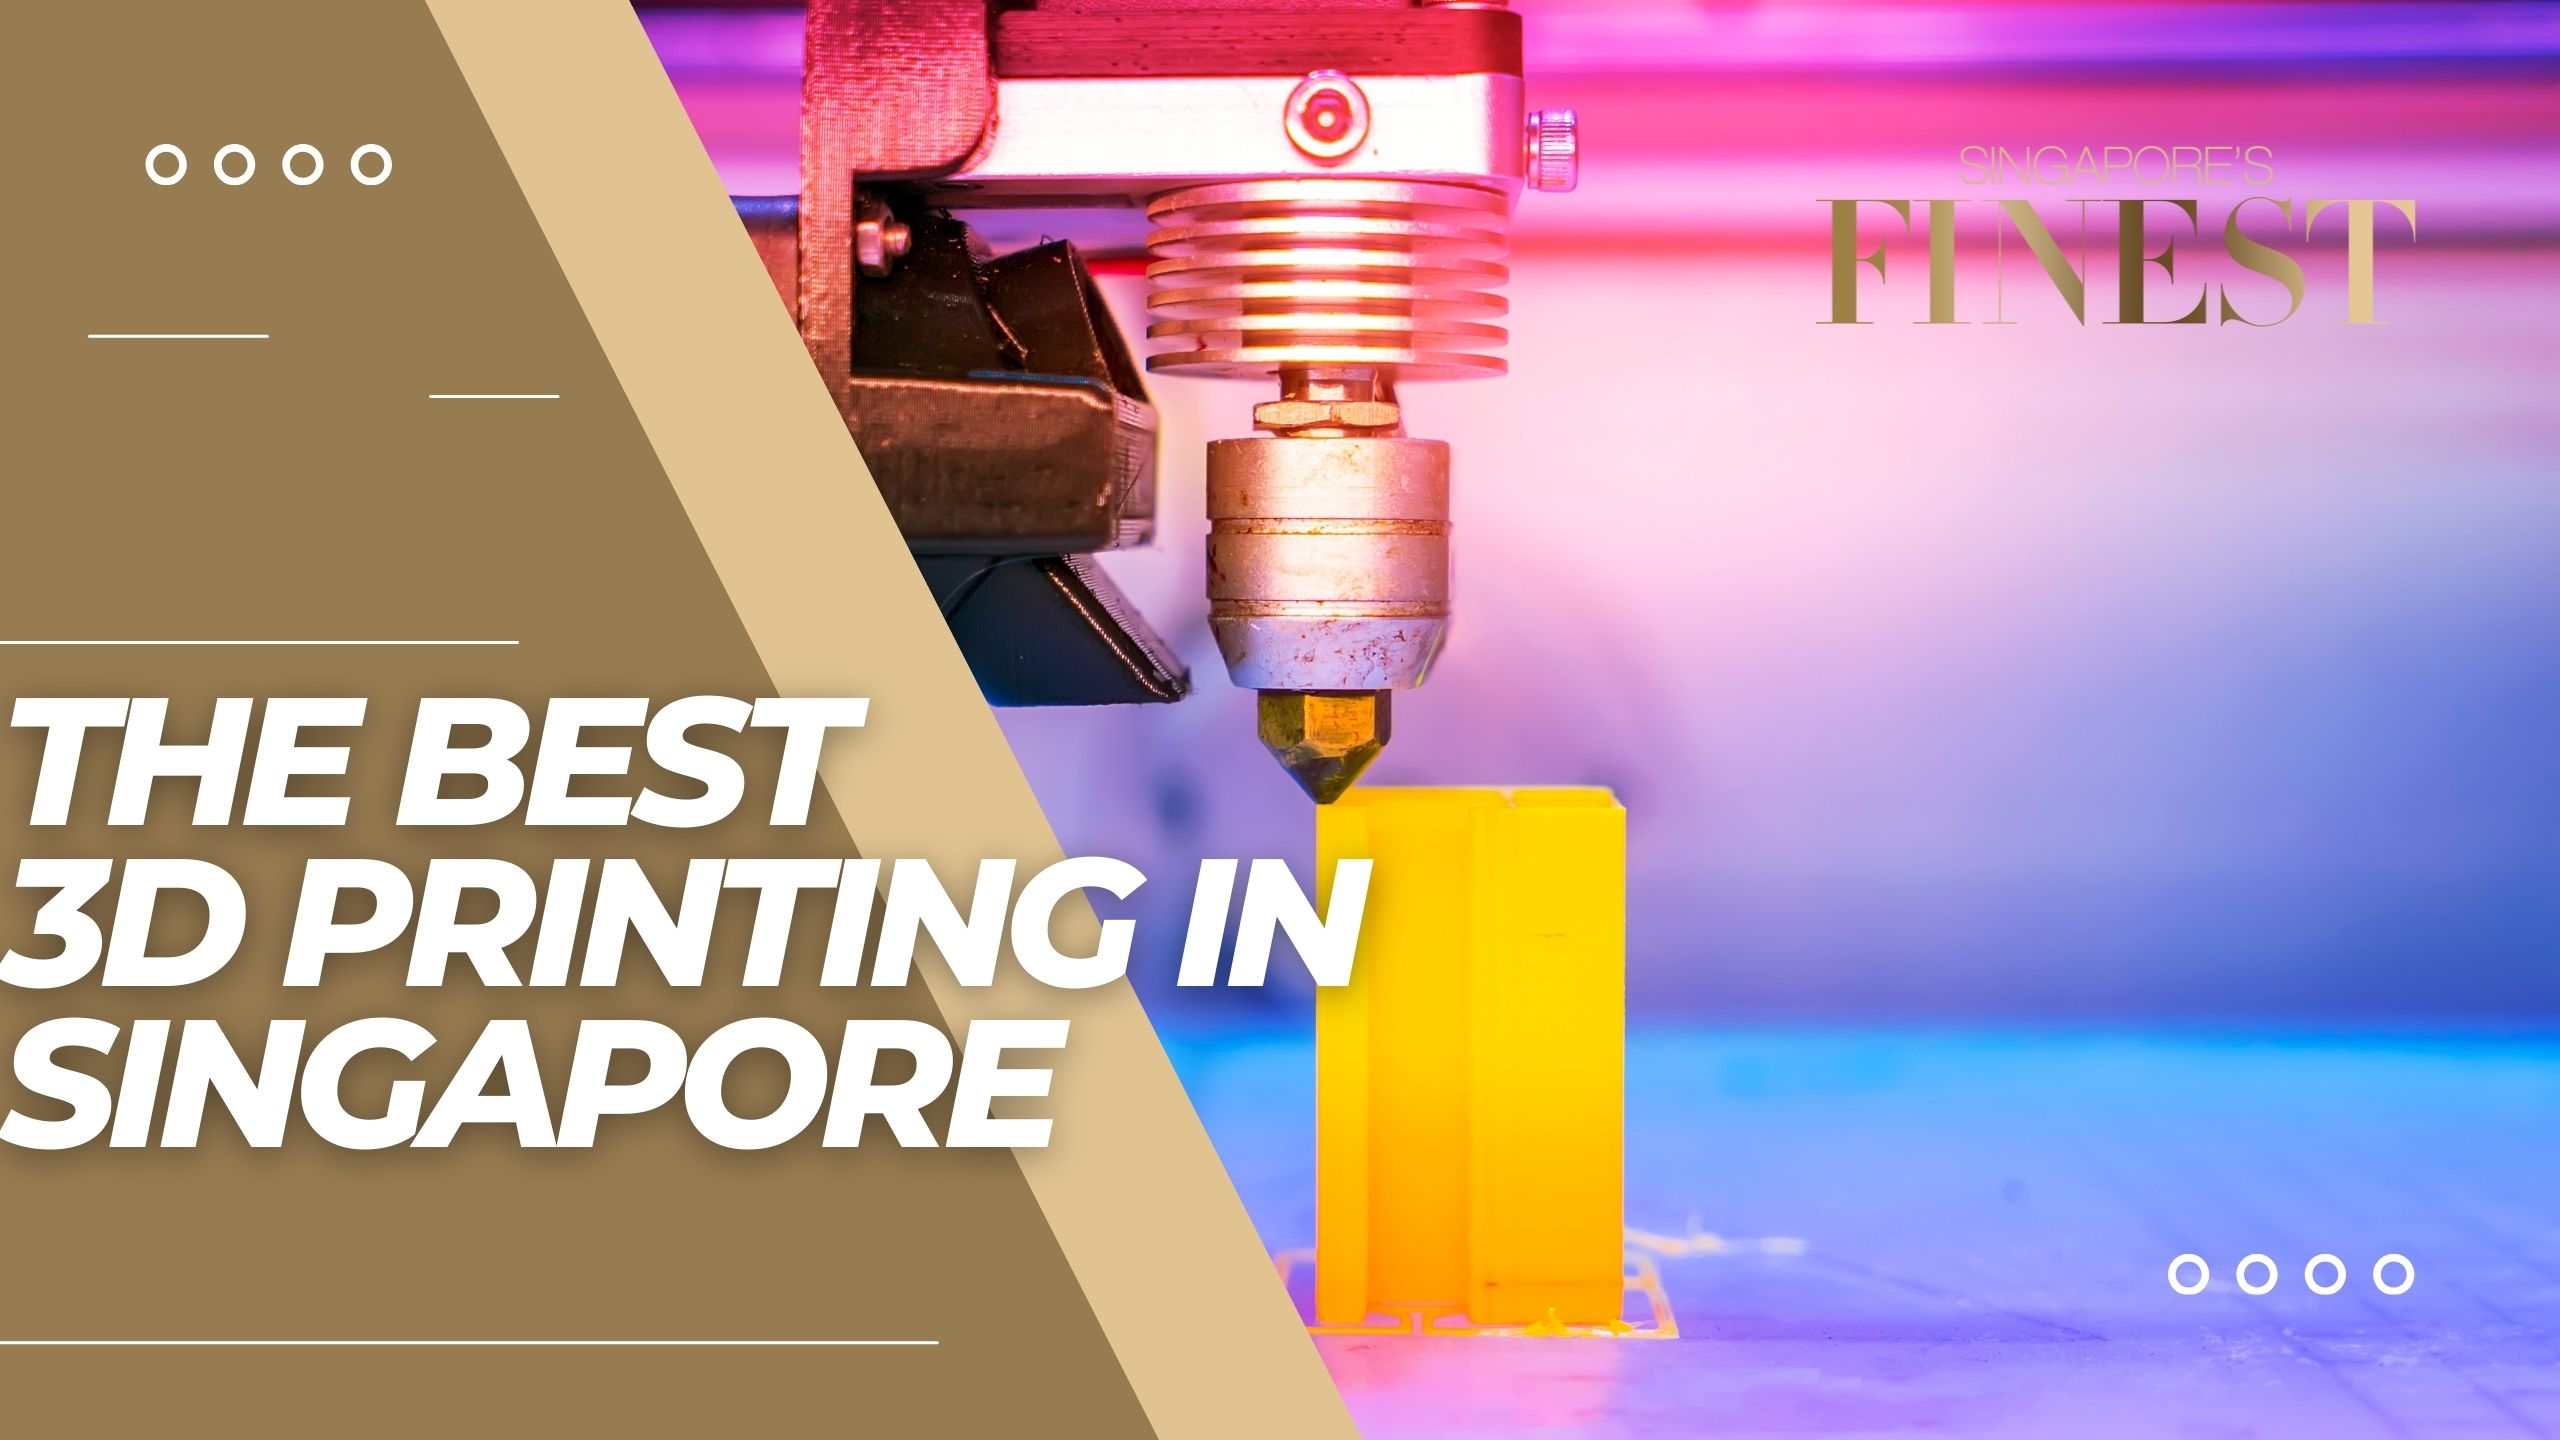 The Finest 3D Printing in Singapore